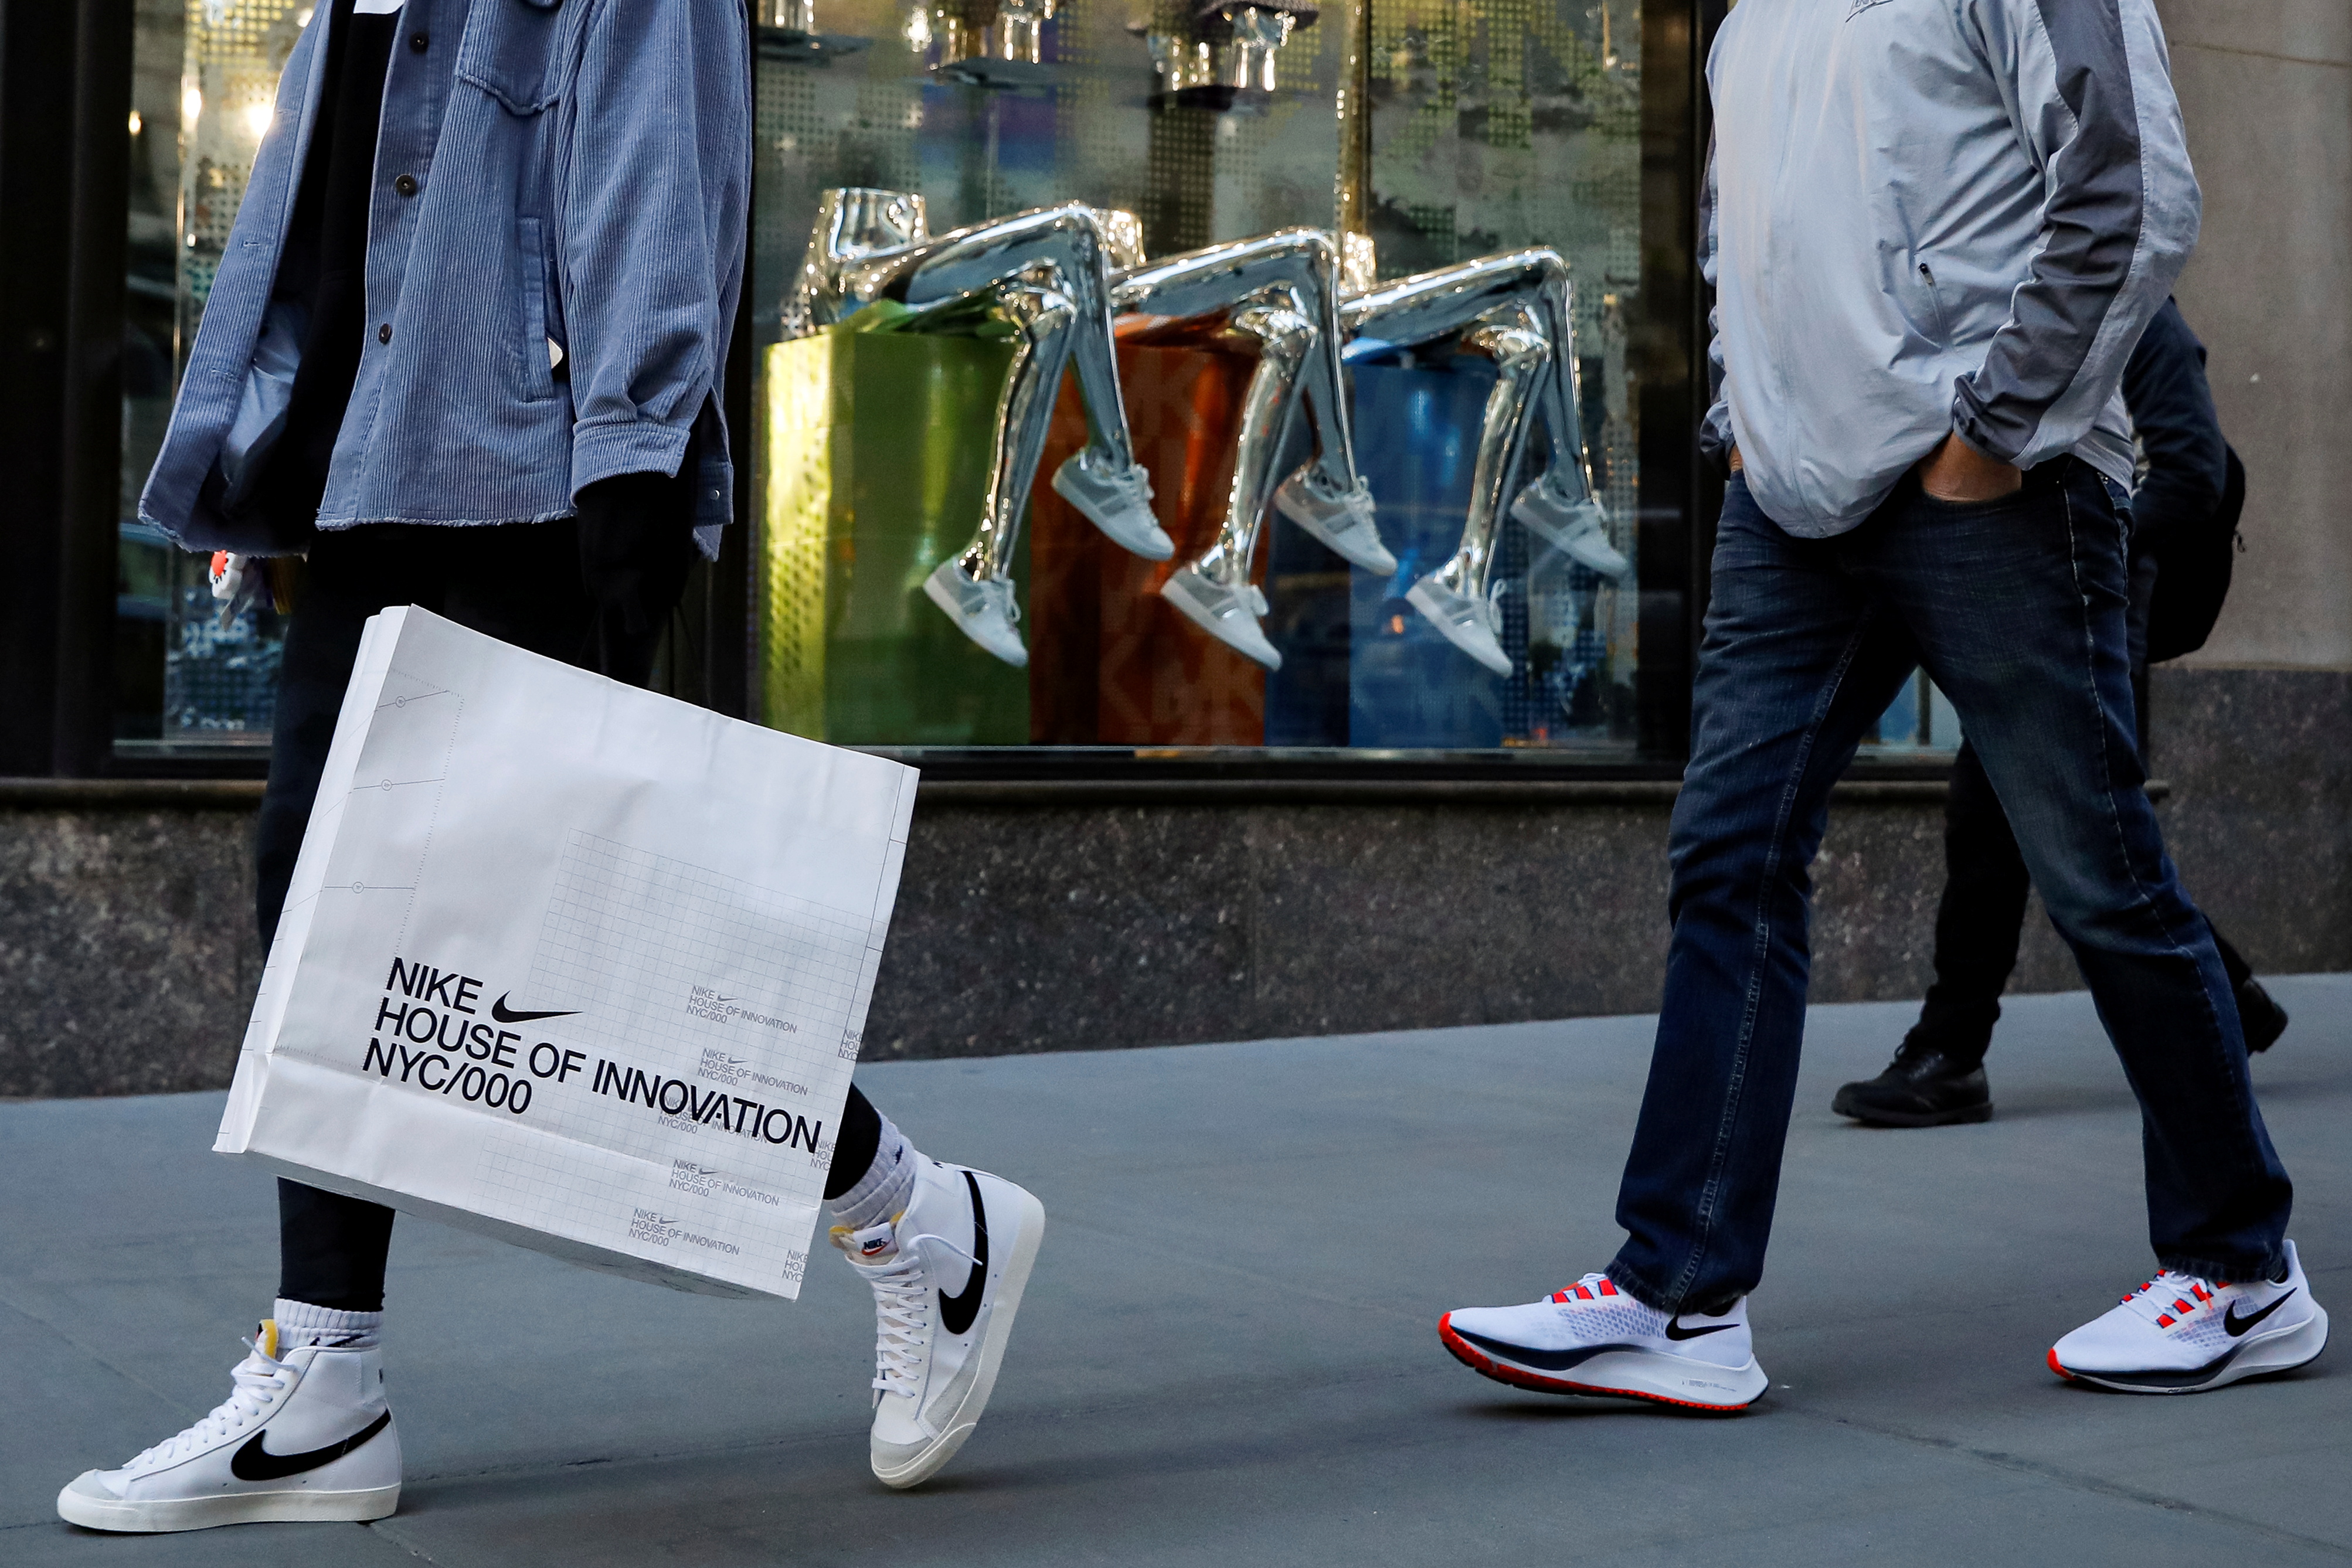 People shop on 5th Avenue in New York